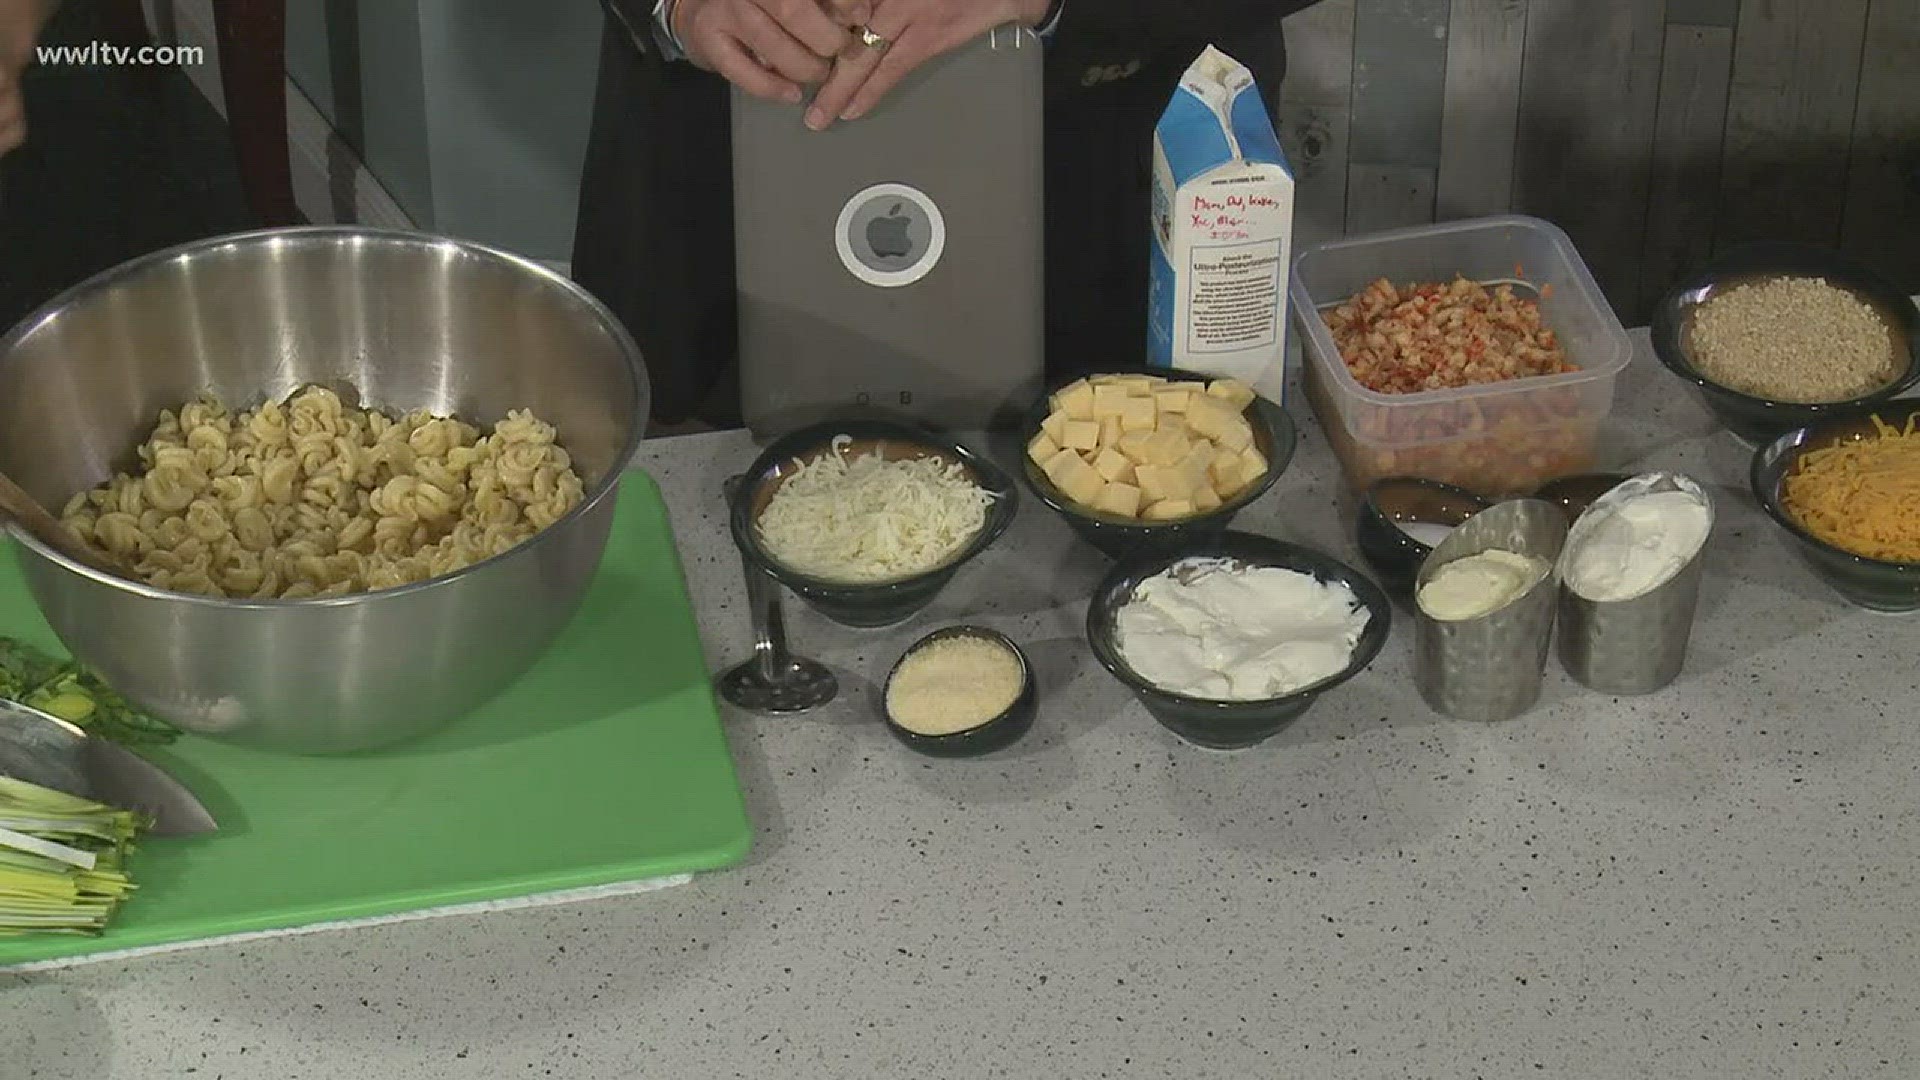 Chef Hosie Bourgeouis from Briquette shares a perfect dish for Lent.